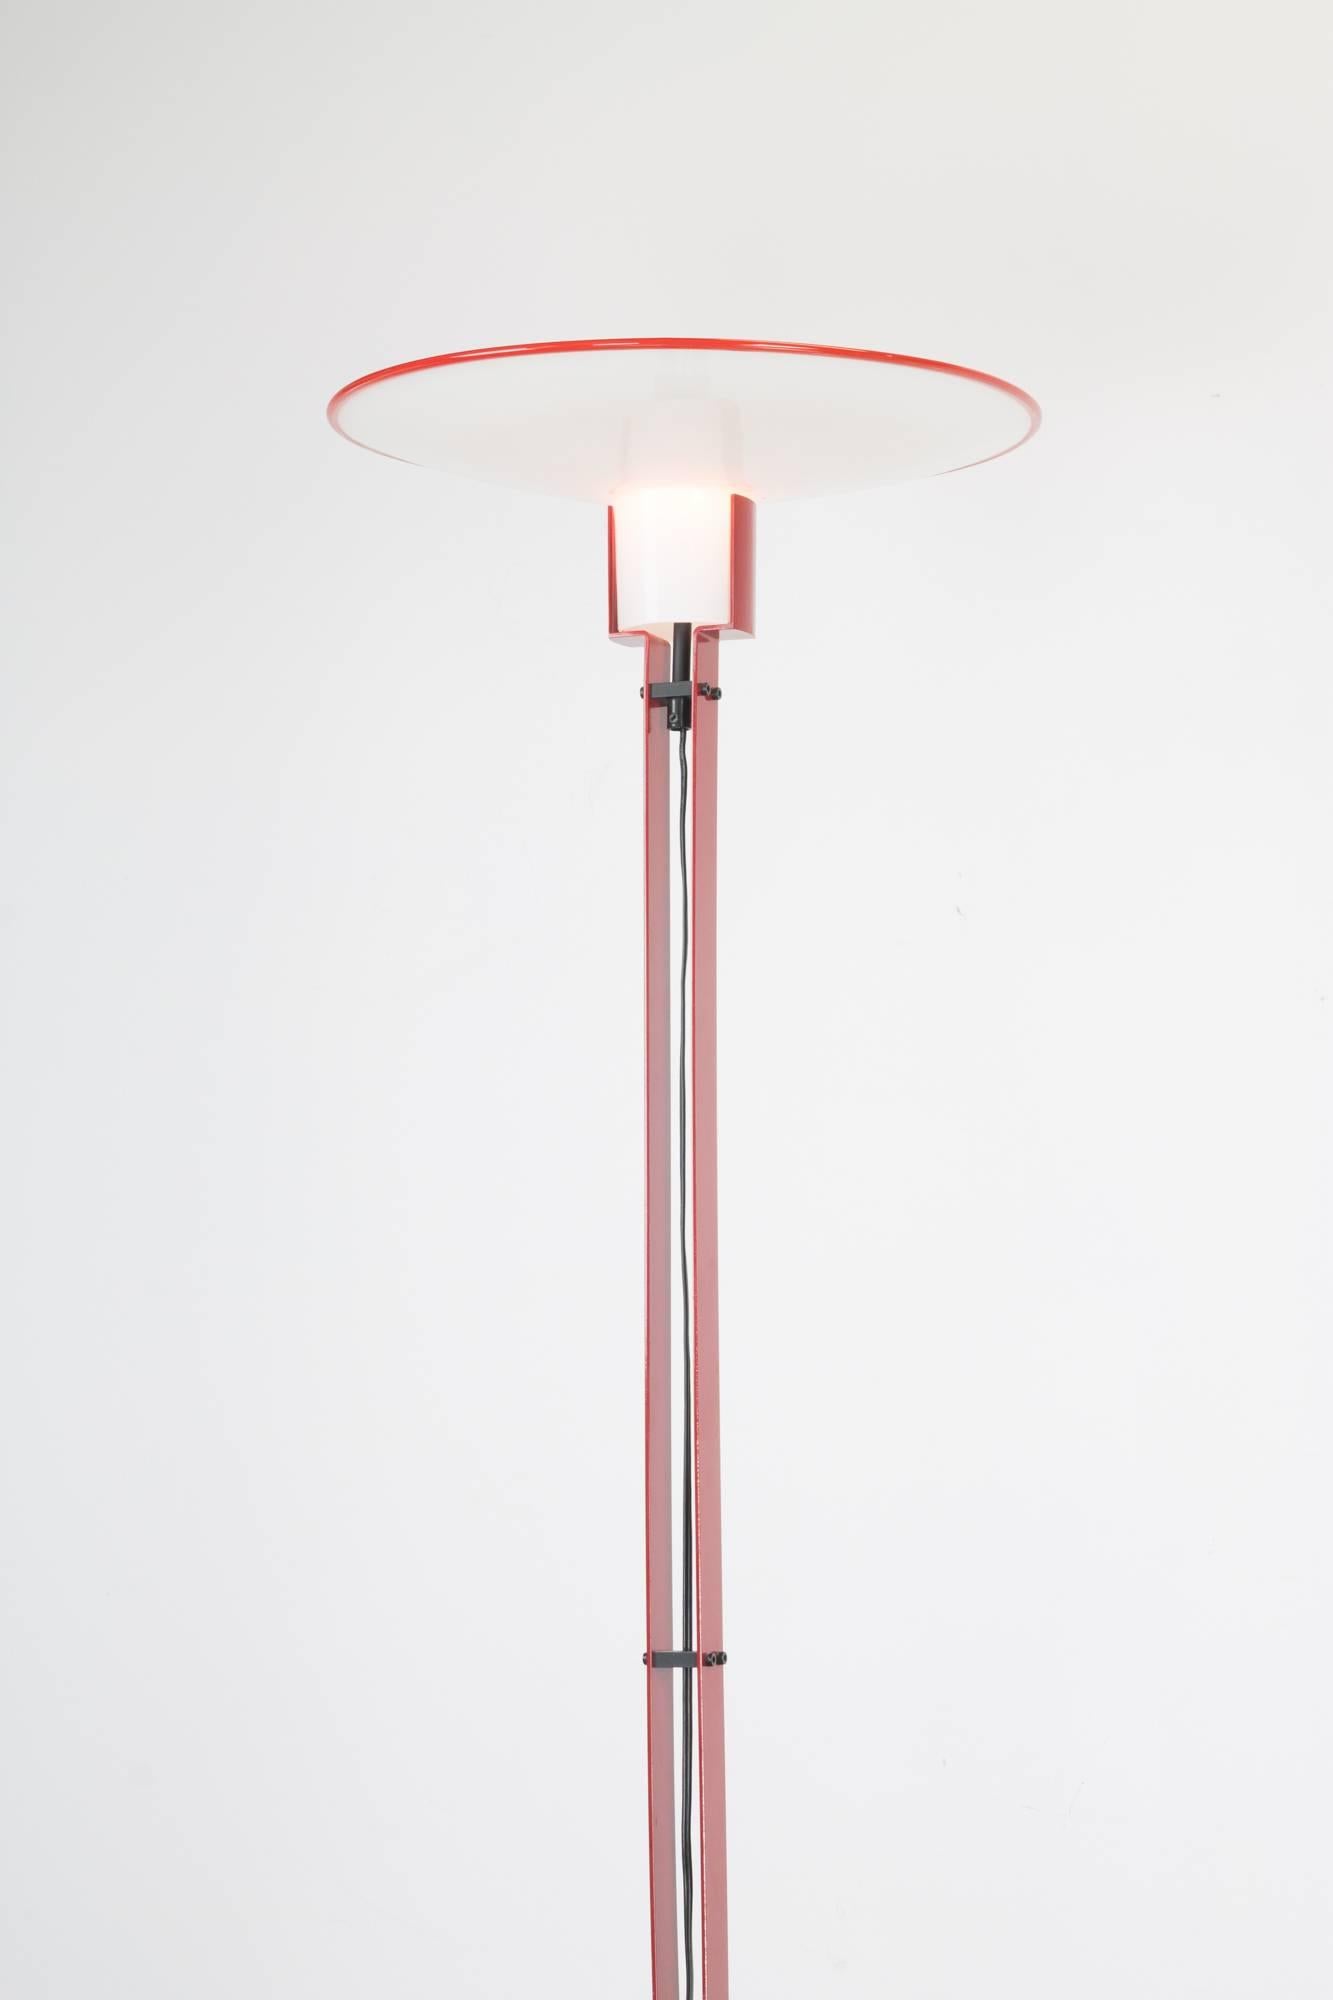 An exemplary 1970s Italian floor lamp by Relux, with circular enameled black steel base and two red flat steel bars running parallel upward with the cord, terminating at the milk white Murano glass shade with red trim. (Shade diameter is 15 in.)